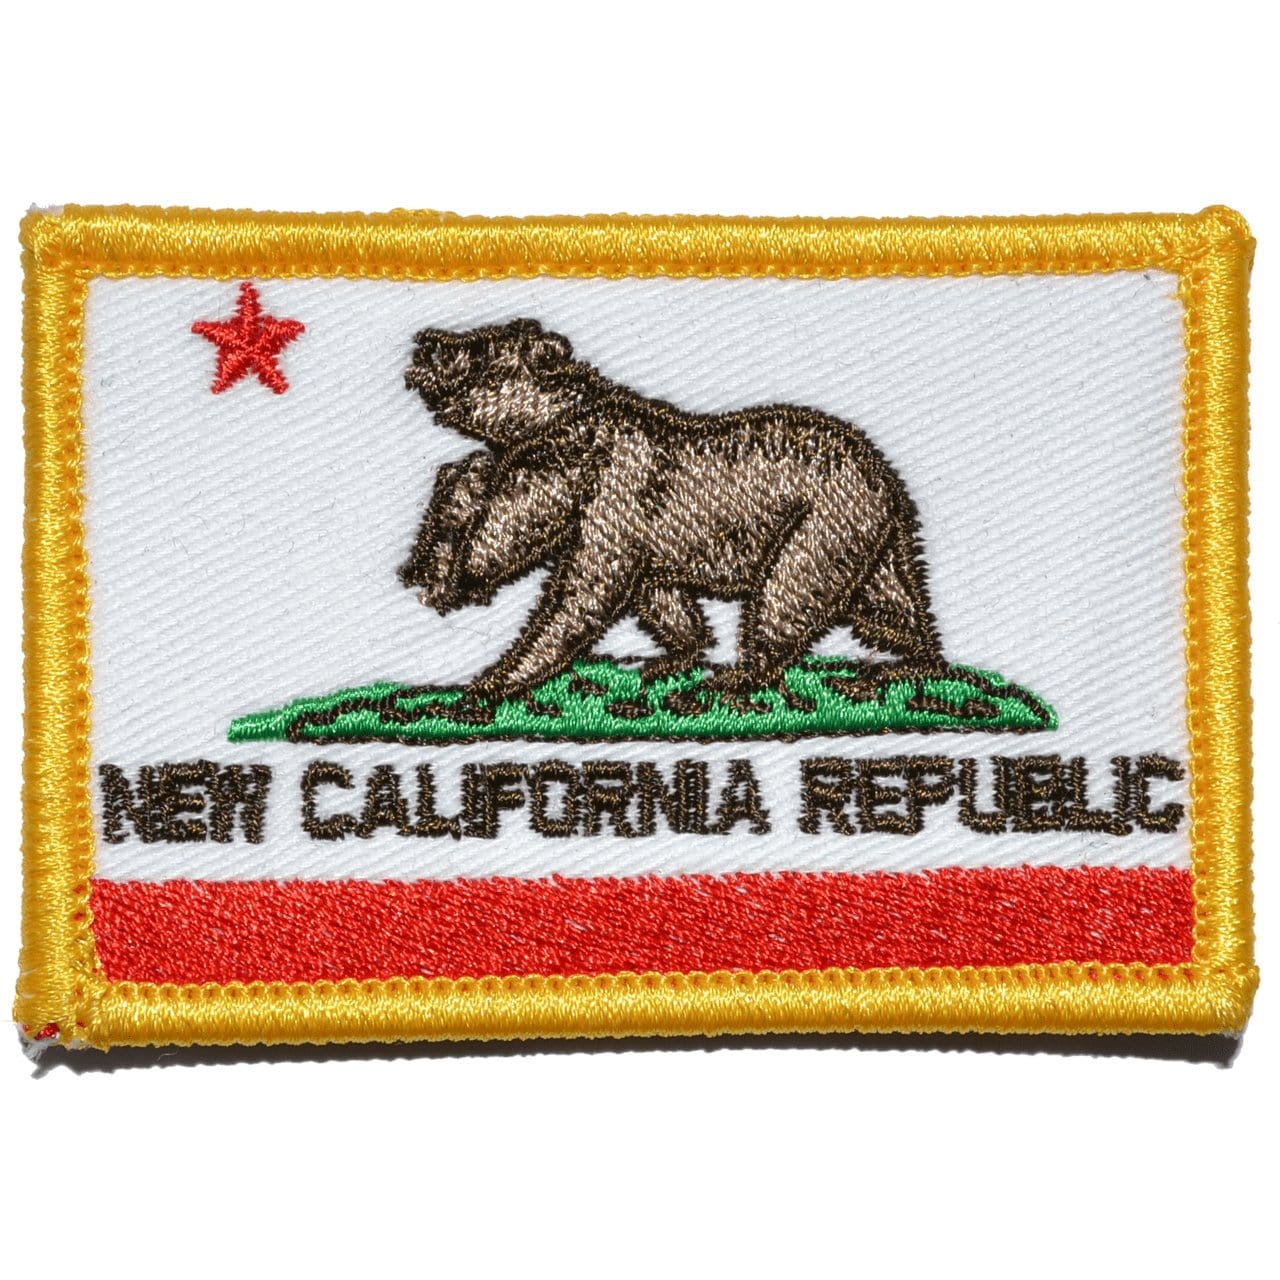 Tactical Gear Junkie Patches Full Color New California Republic NCR State Flag - 2x3 Patch